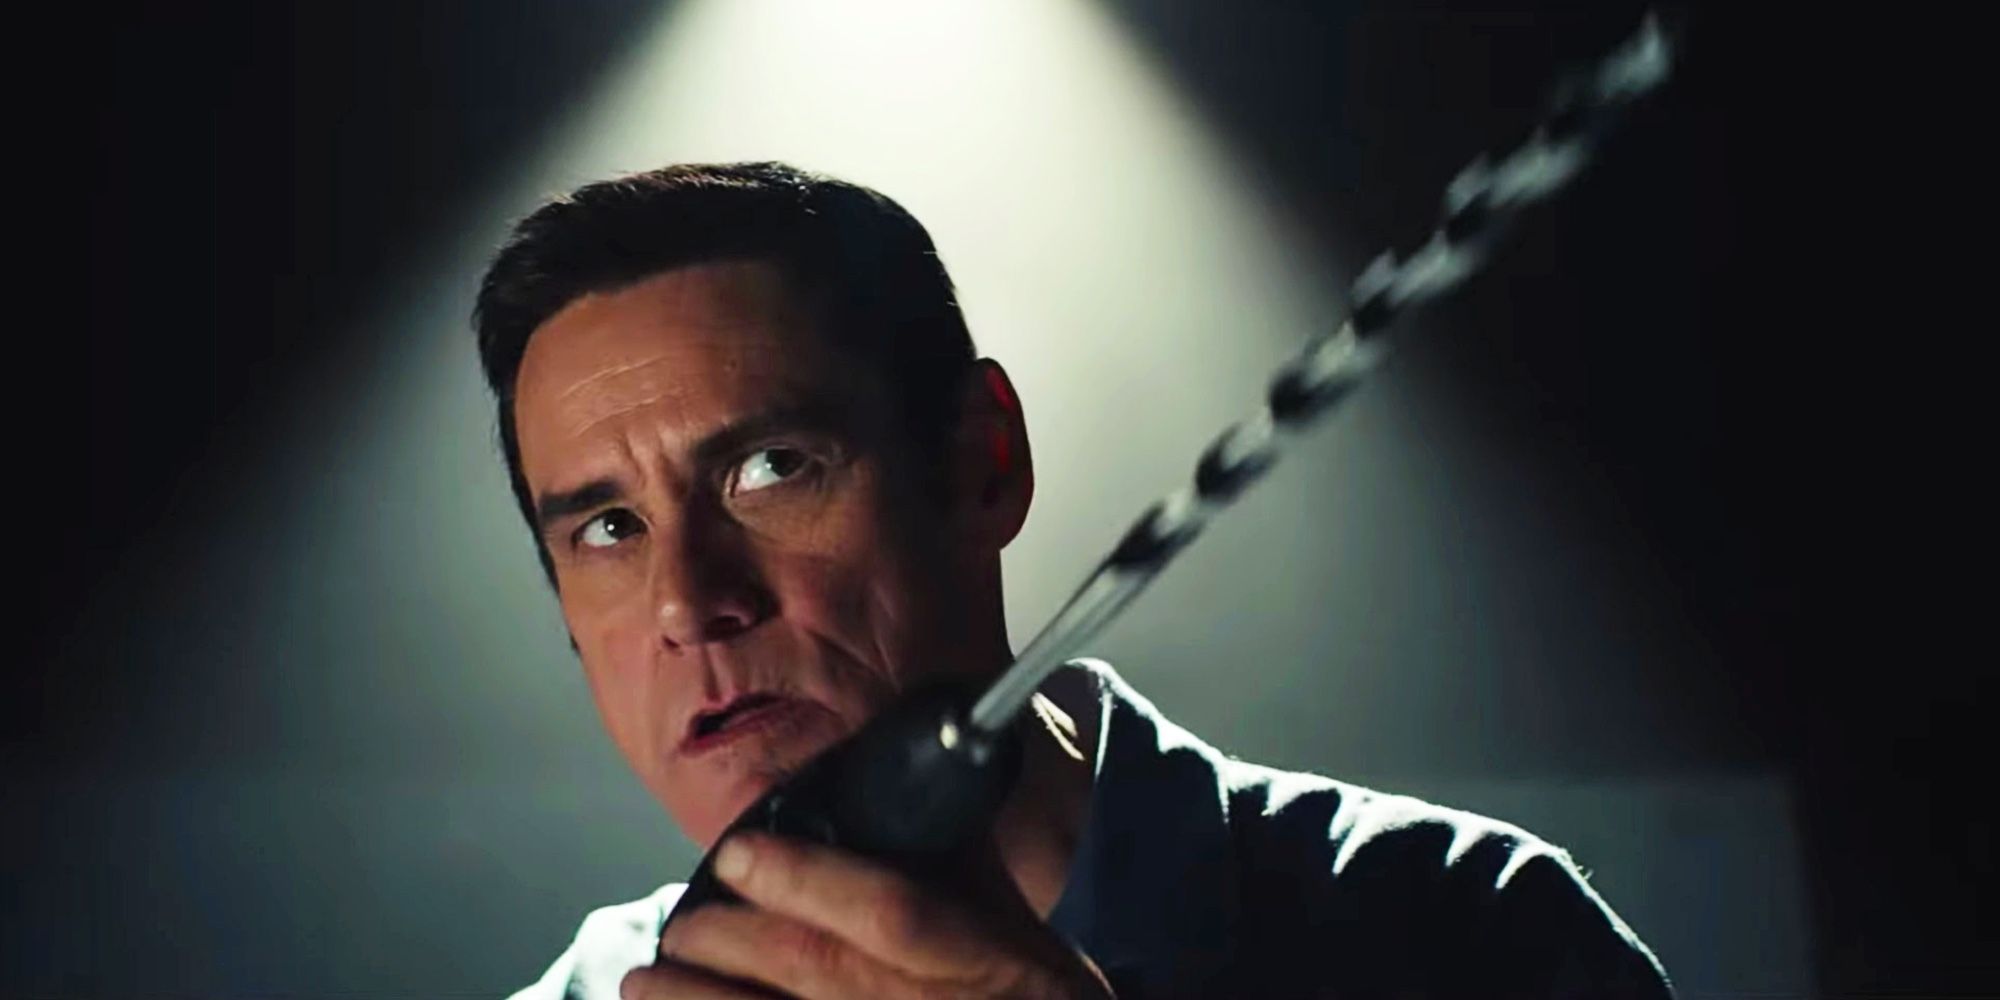 Jim Carrey Returns As The Cable Guy In New Super Bowl Commercial